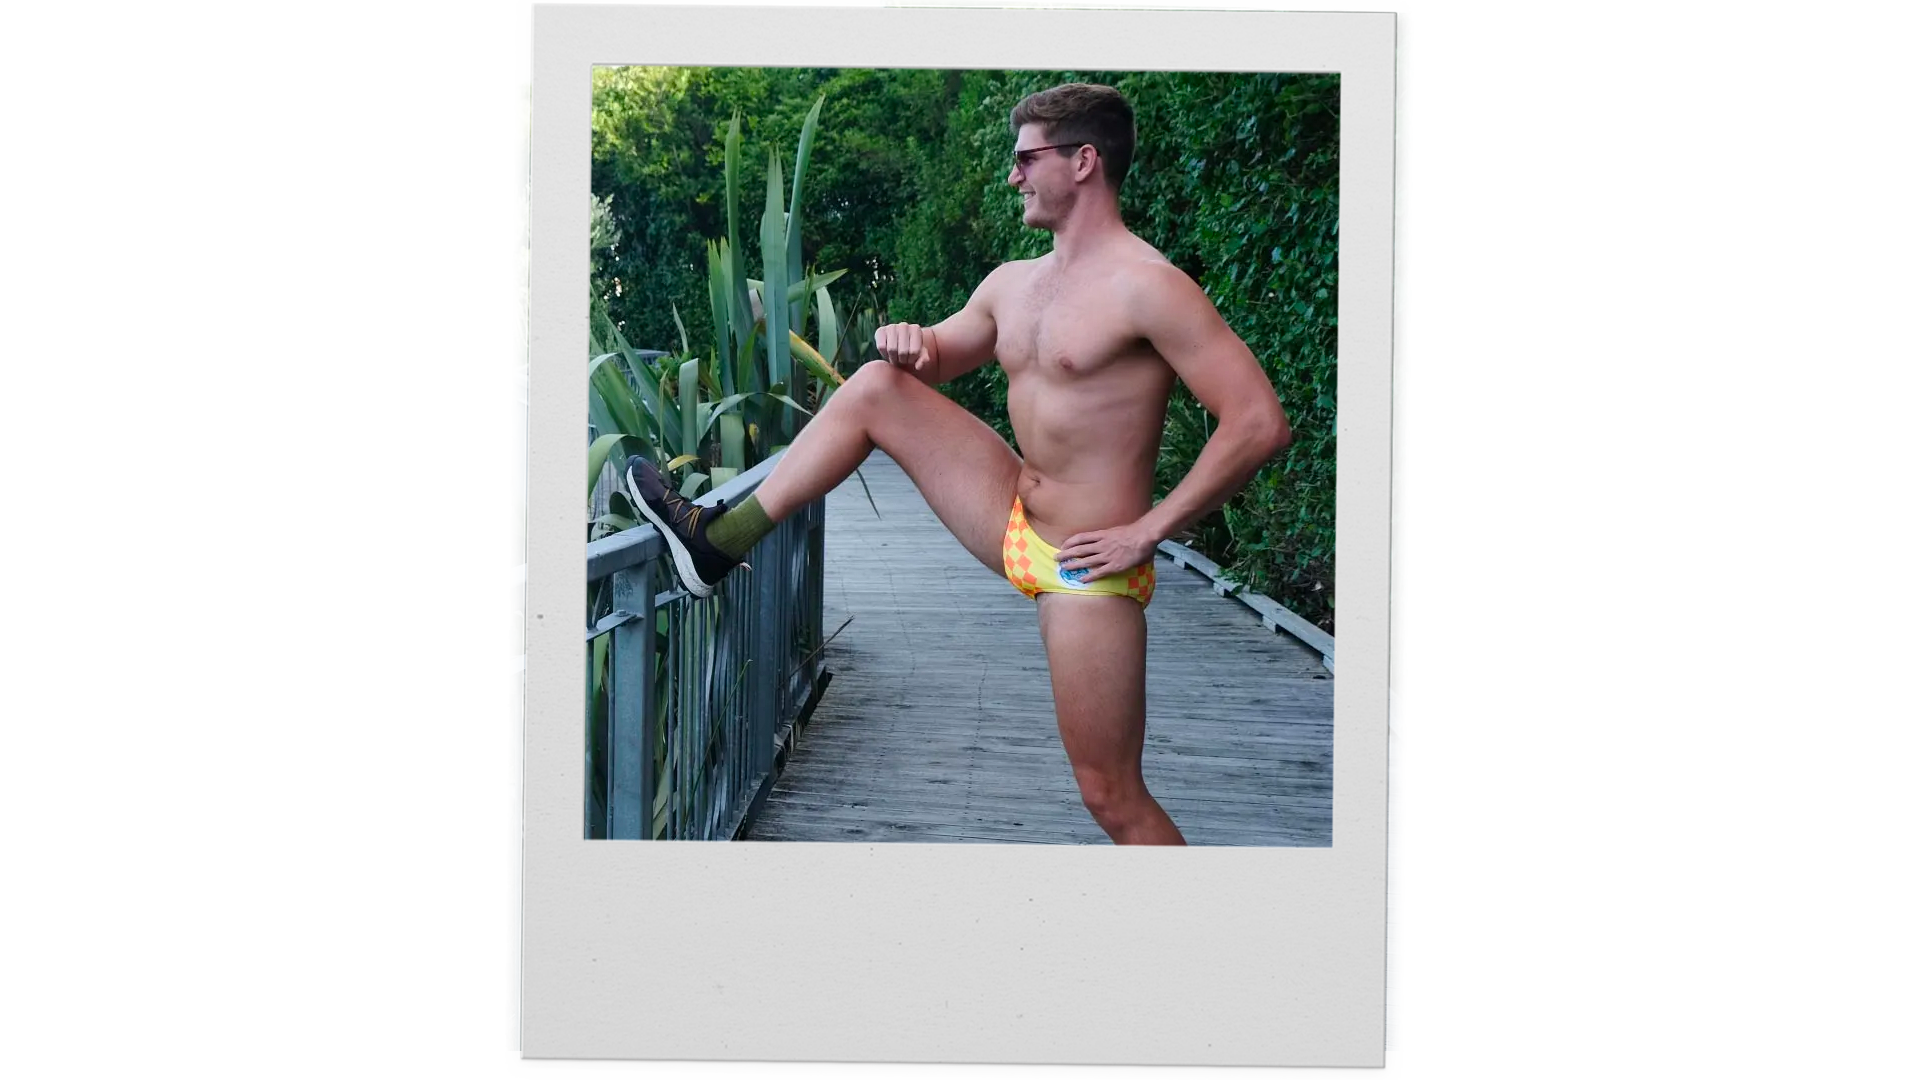 A polaroid photo of a man in Speedo's stretching before a run.